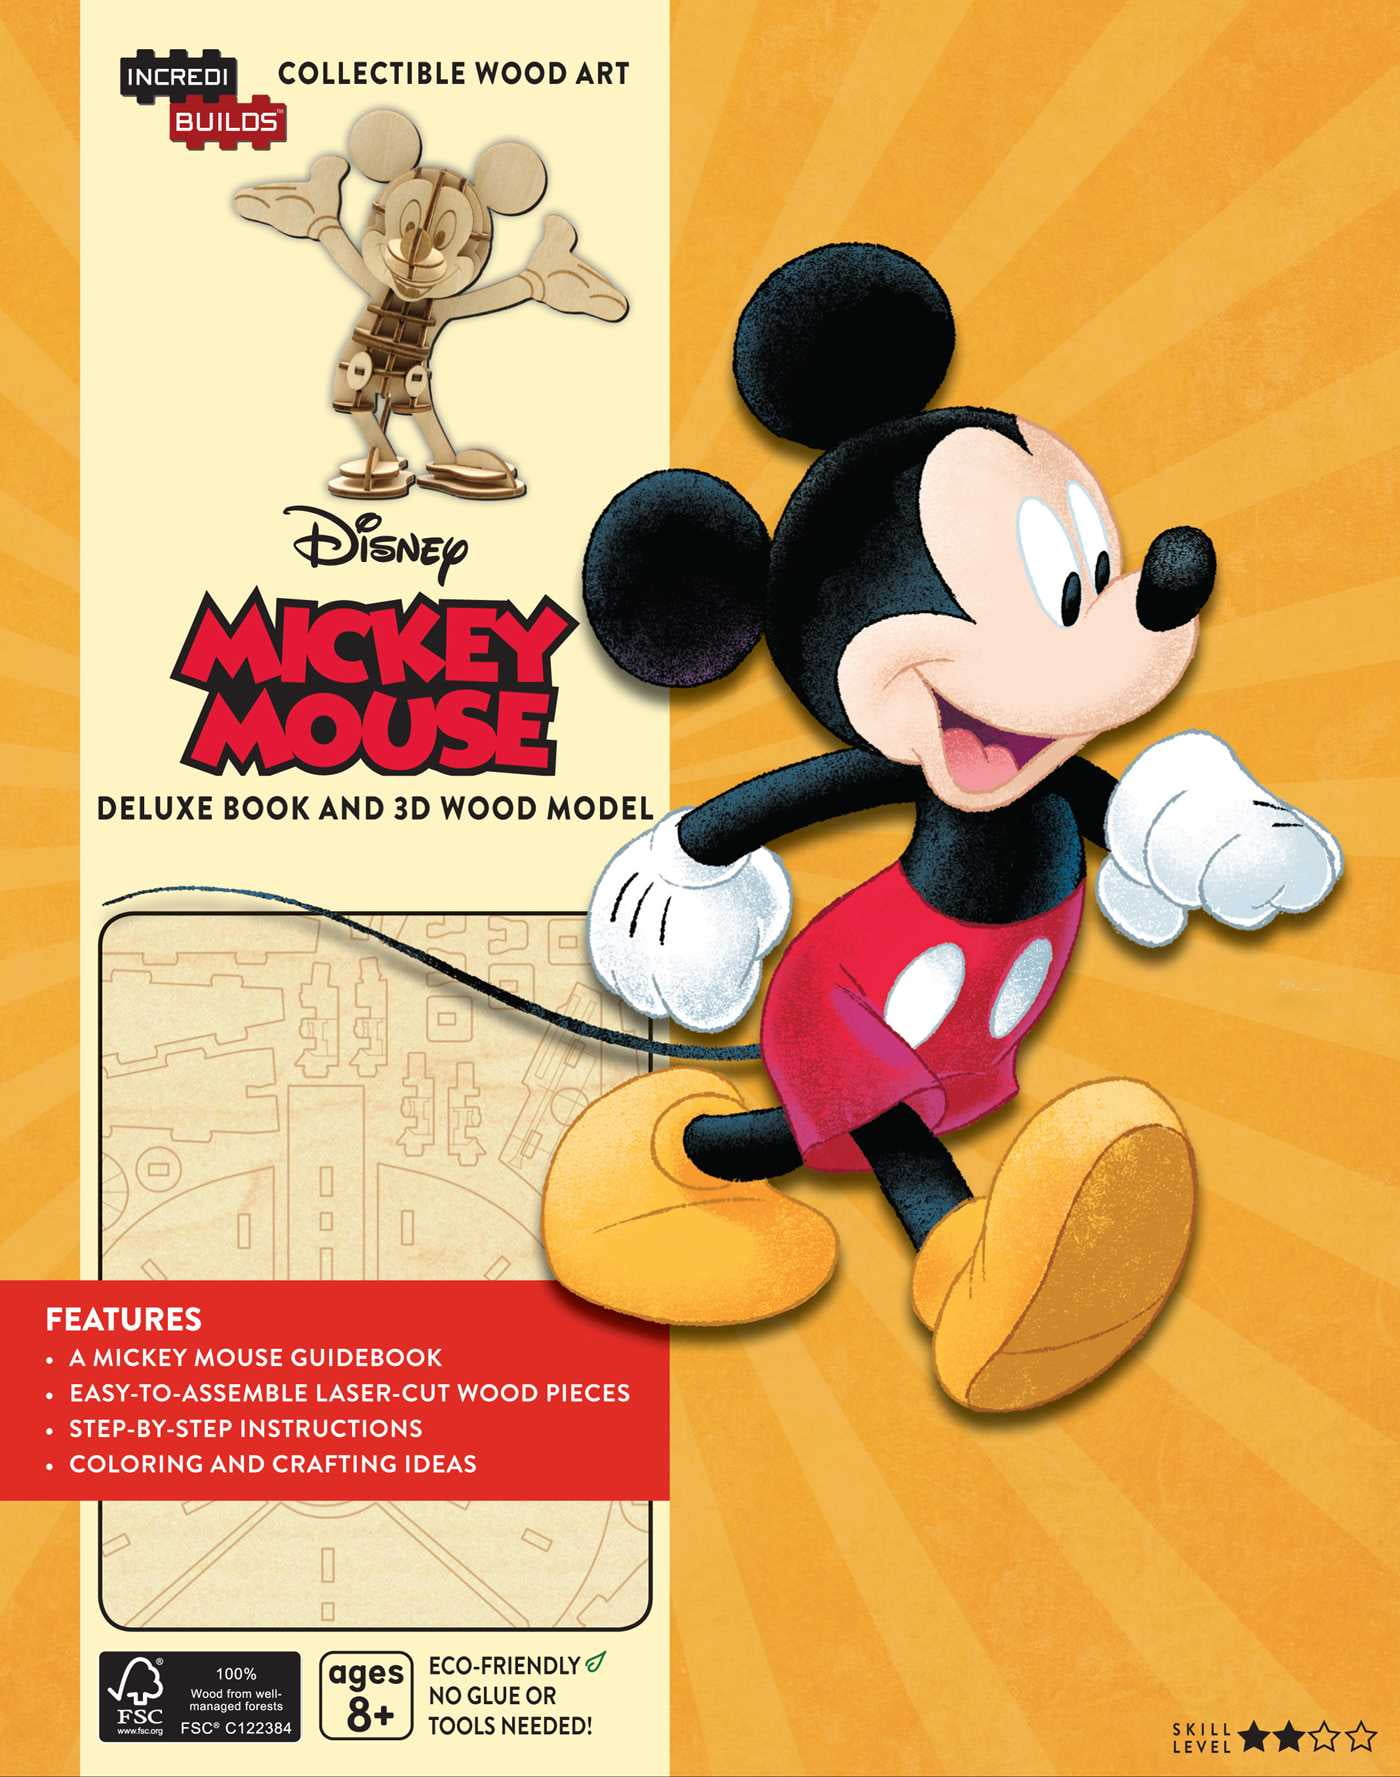 Incredibuilds: IncrediBuilds: Walt Disney: Mickey Mouse Deluxe Book and ...